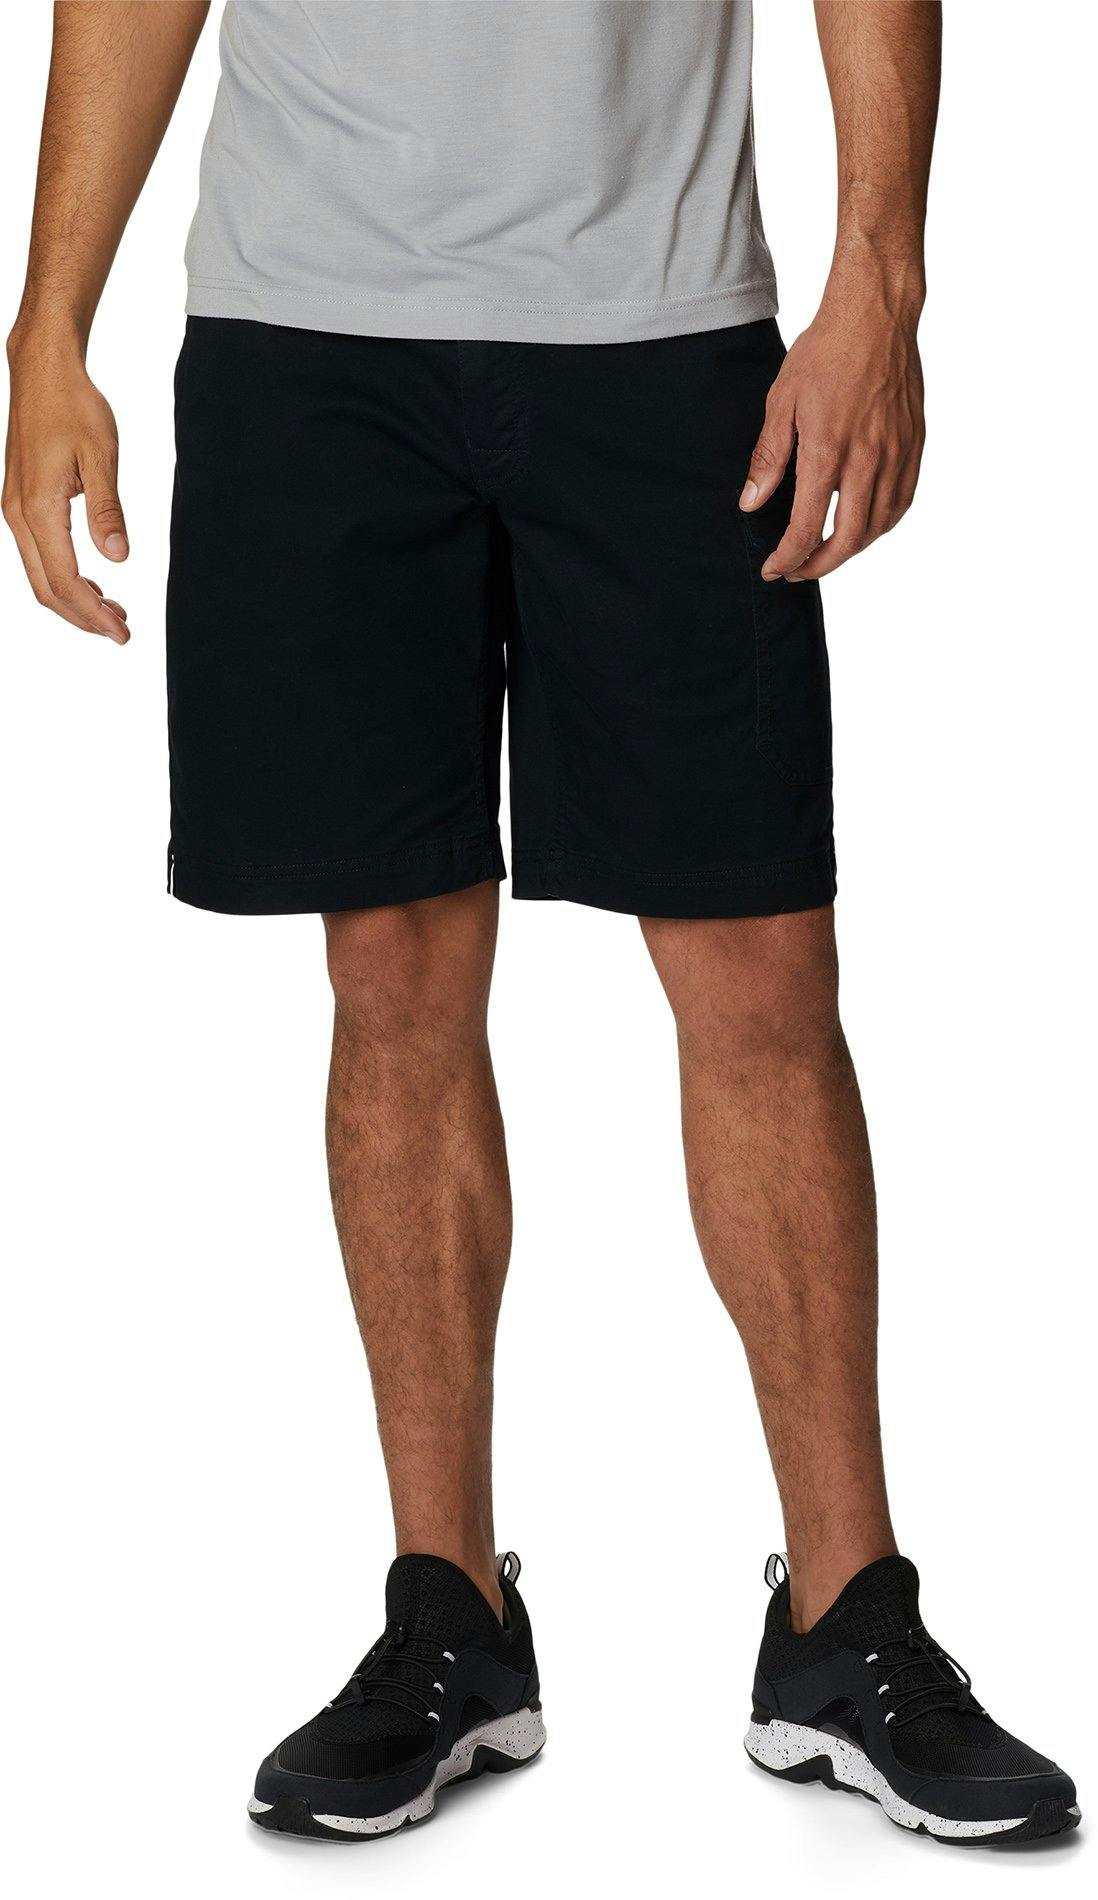 Product image for Pacific Ridge Belted Utility Shorts - Men's